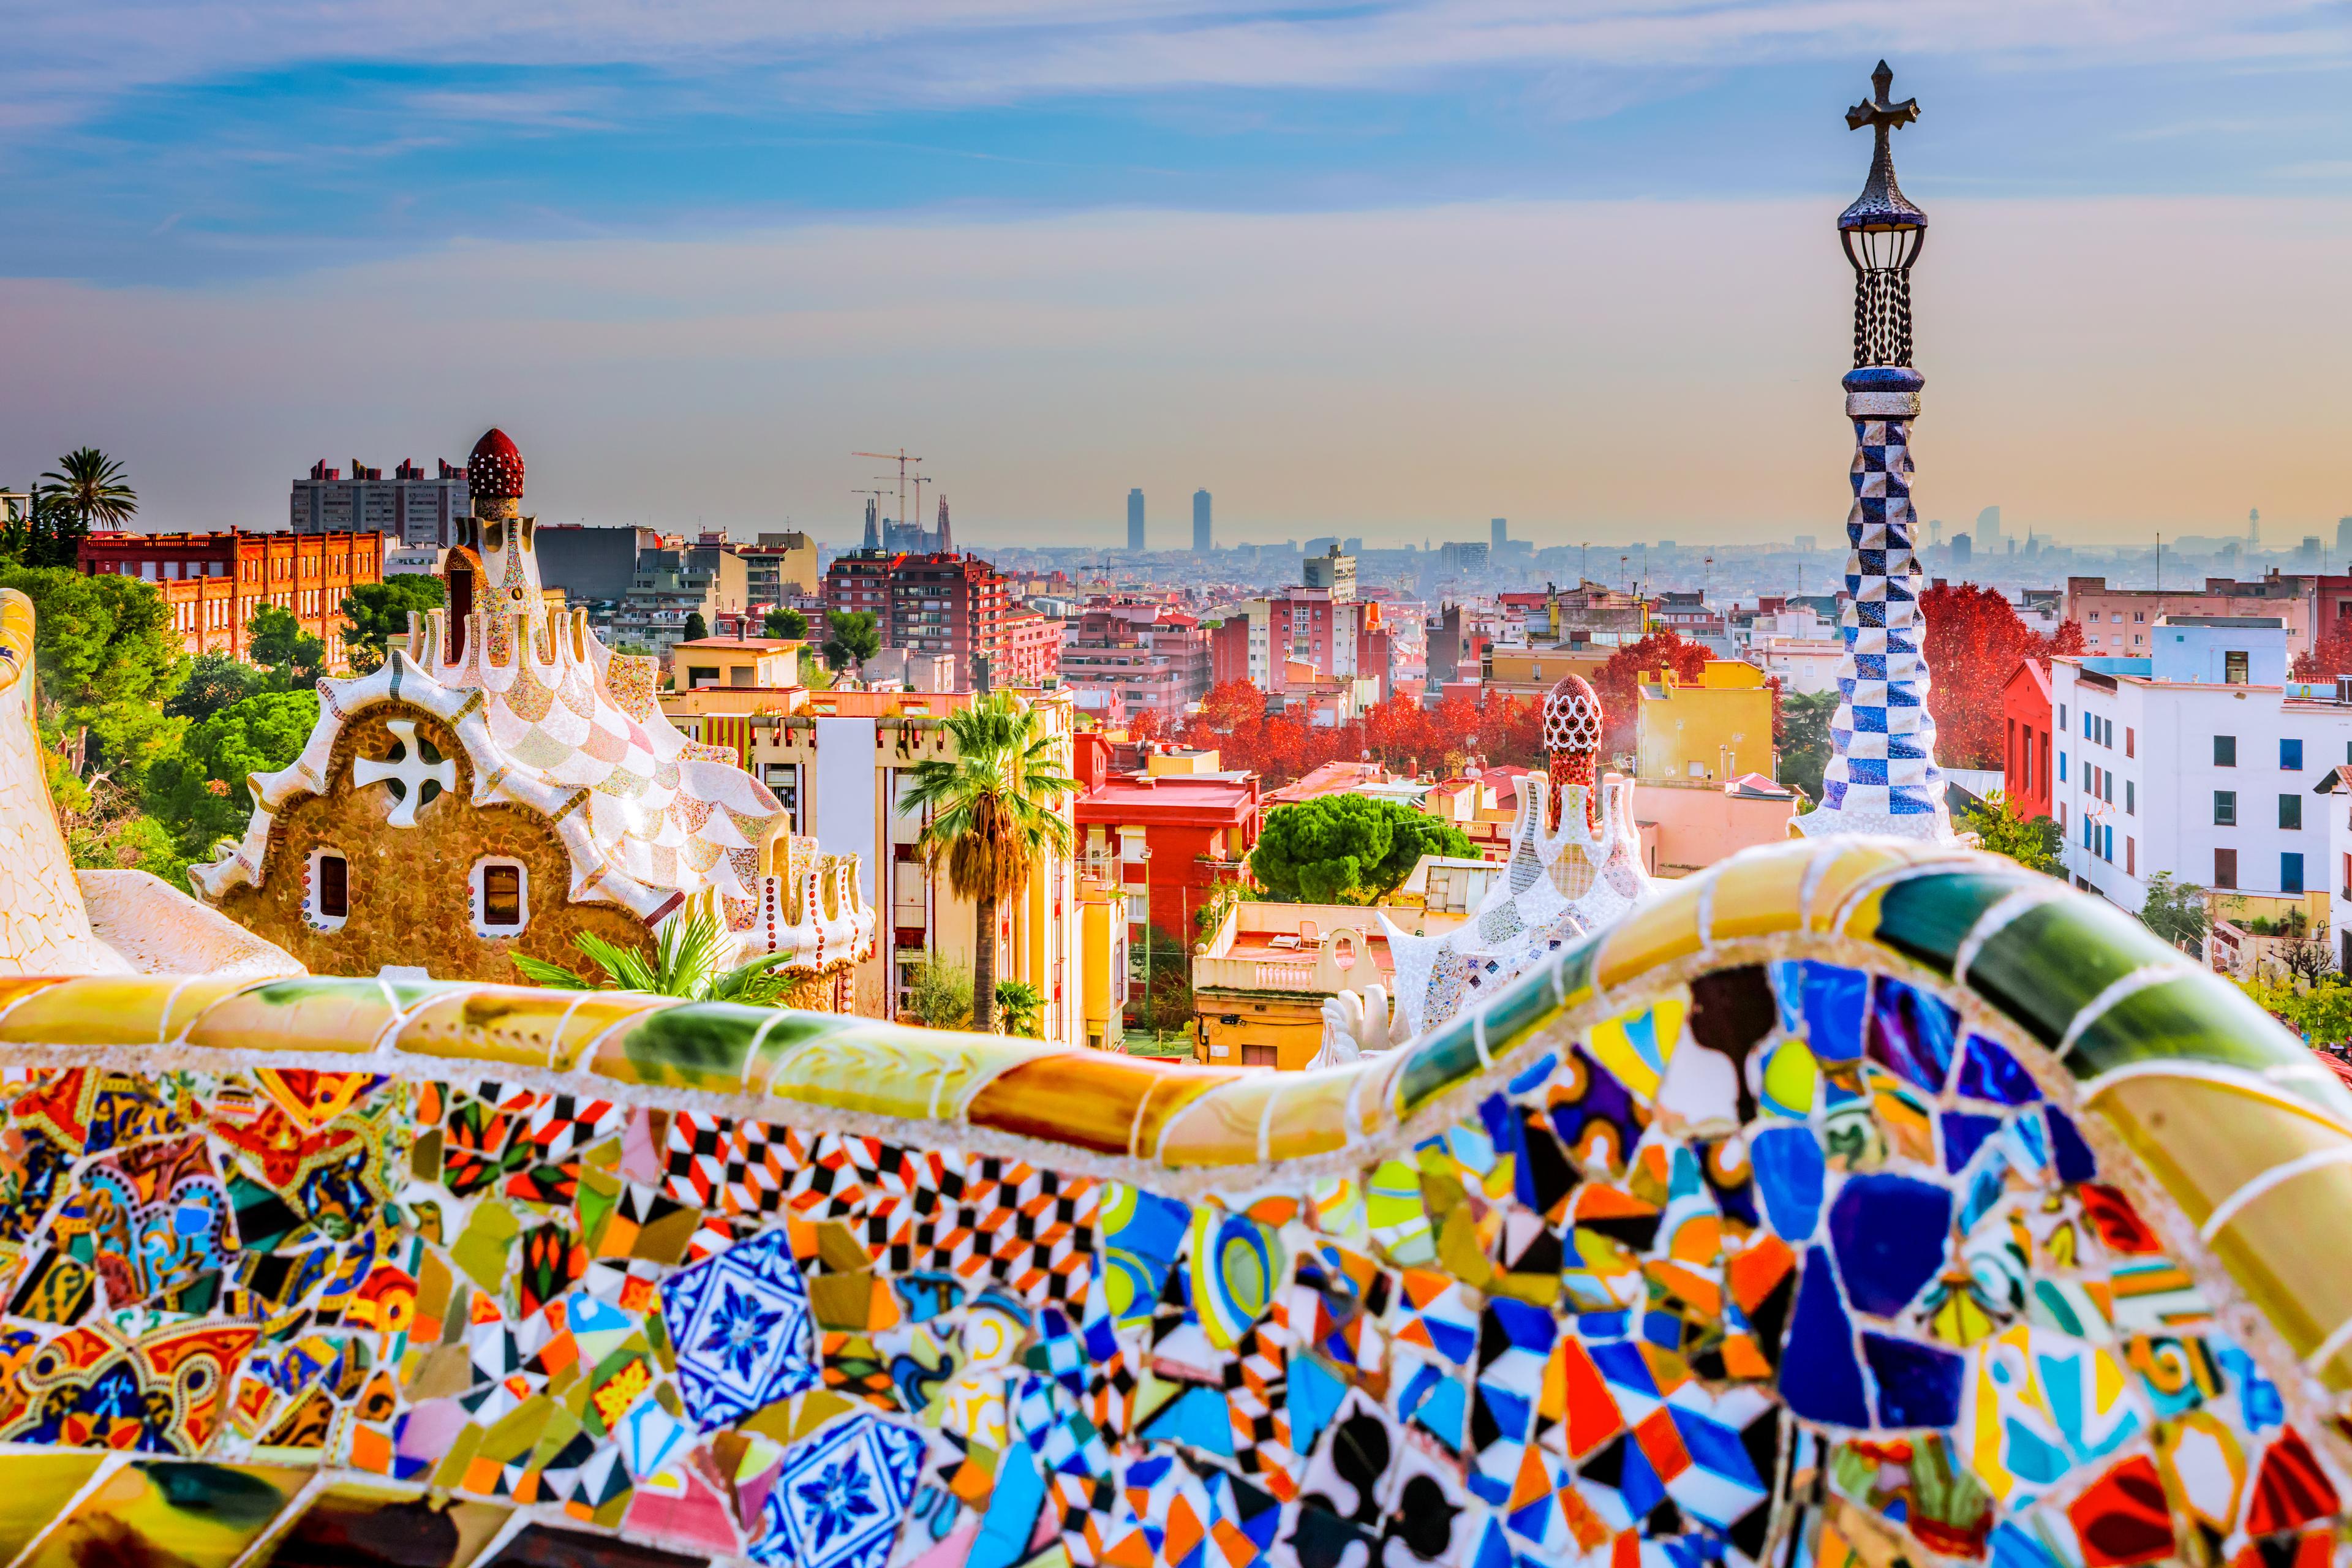 The Barcelona city, cover photo